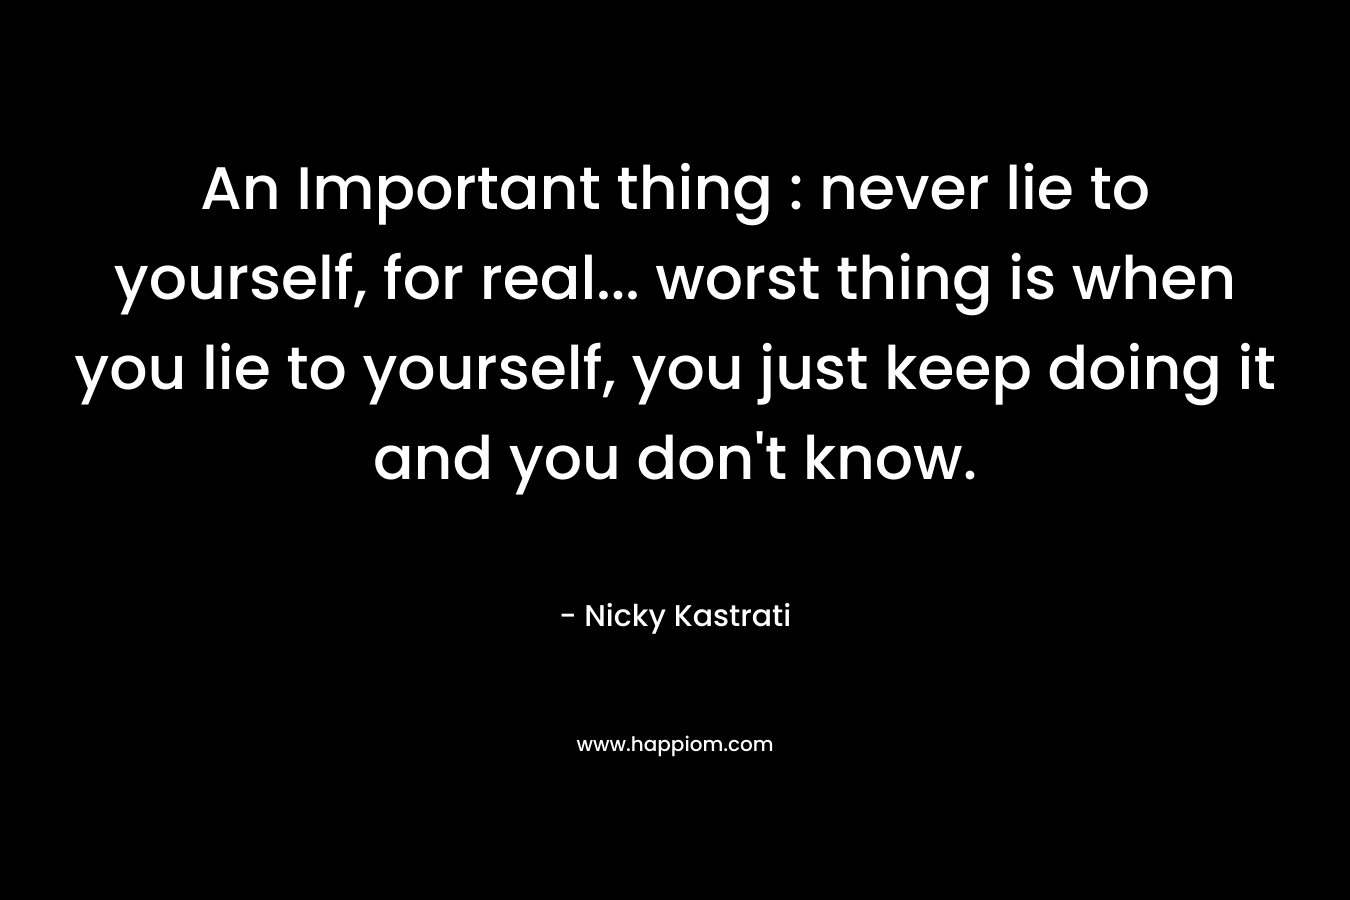 An Important thing : never lie to yourself, for real... worst thing is when you lie to yourself, you just keep doing it and you don't know. 